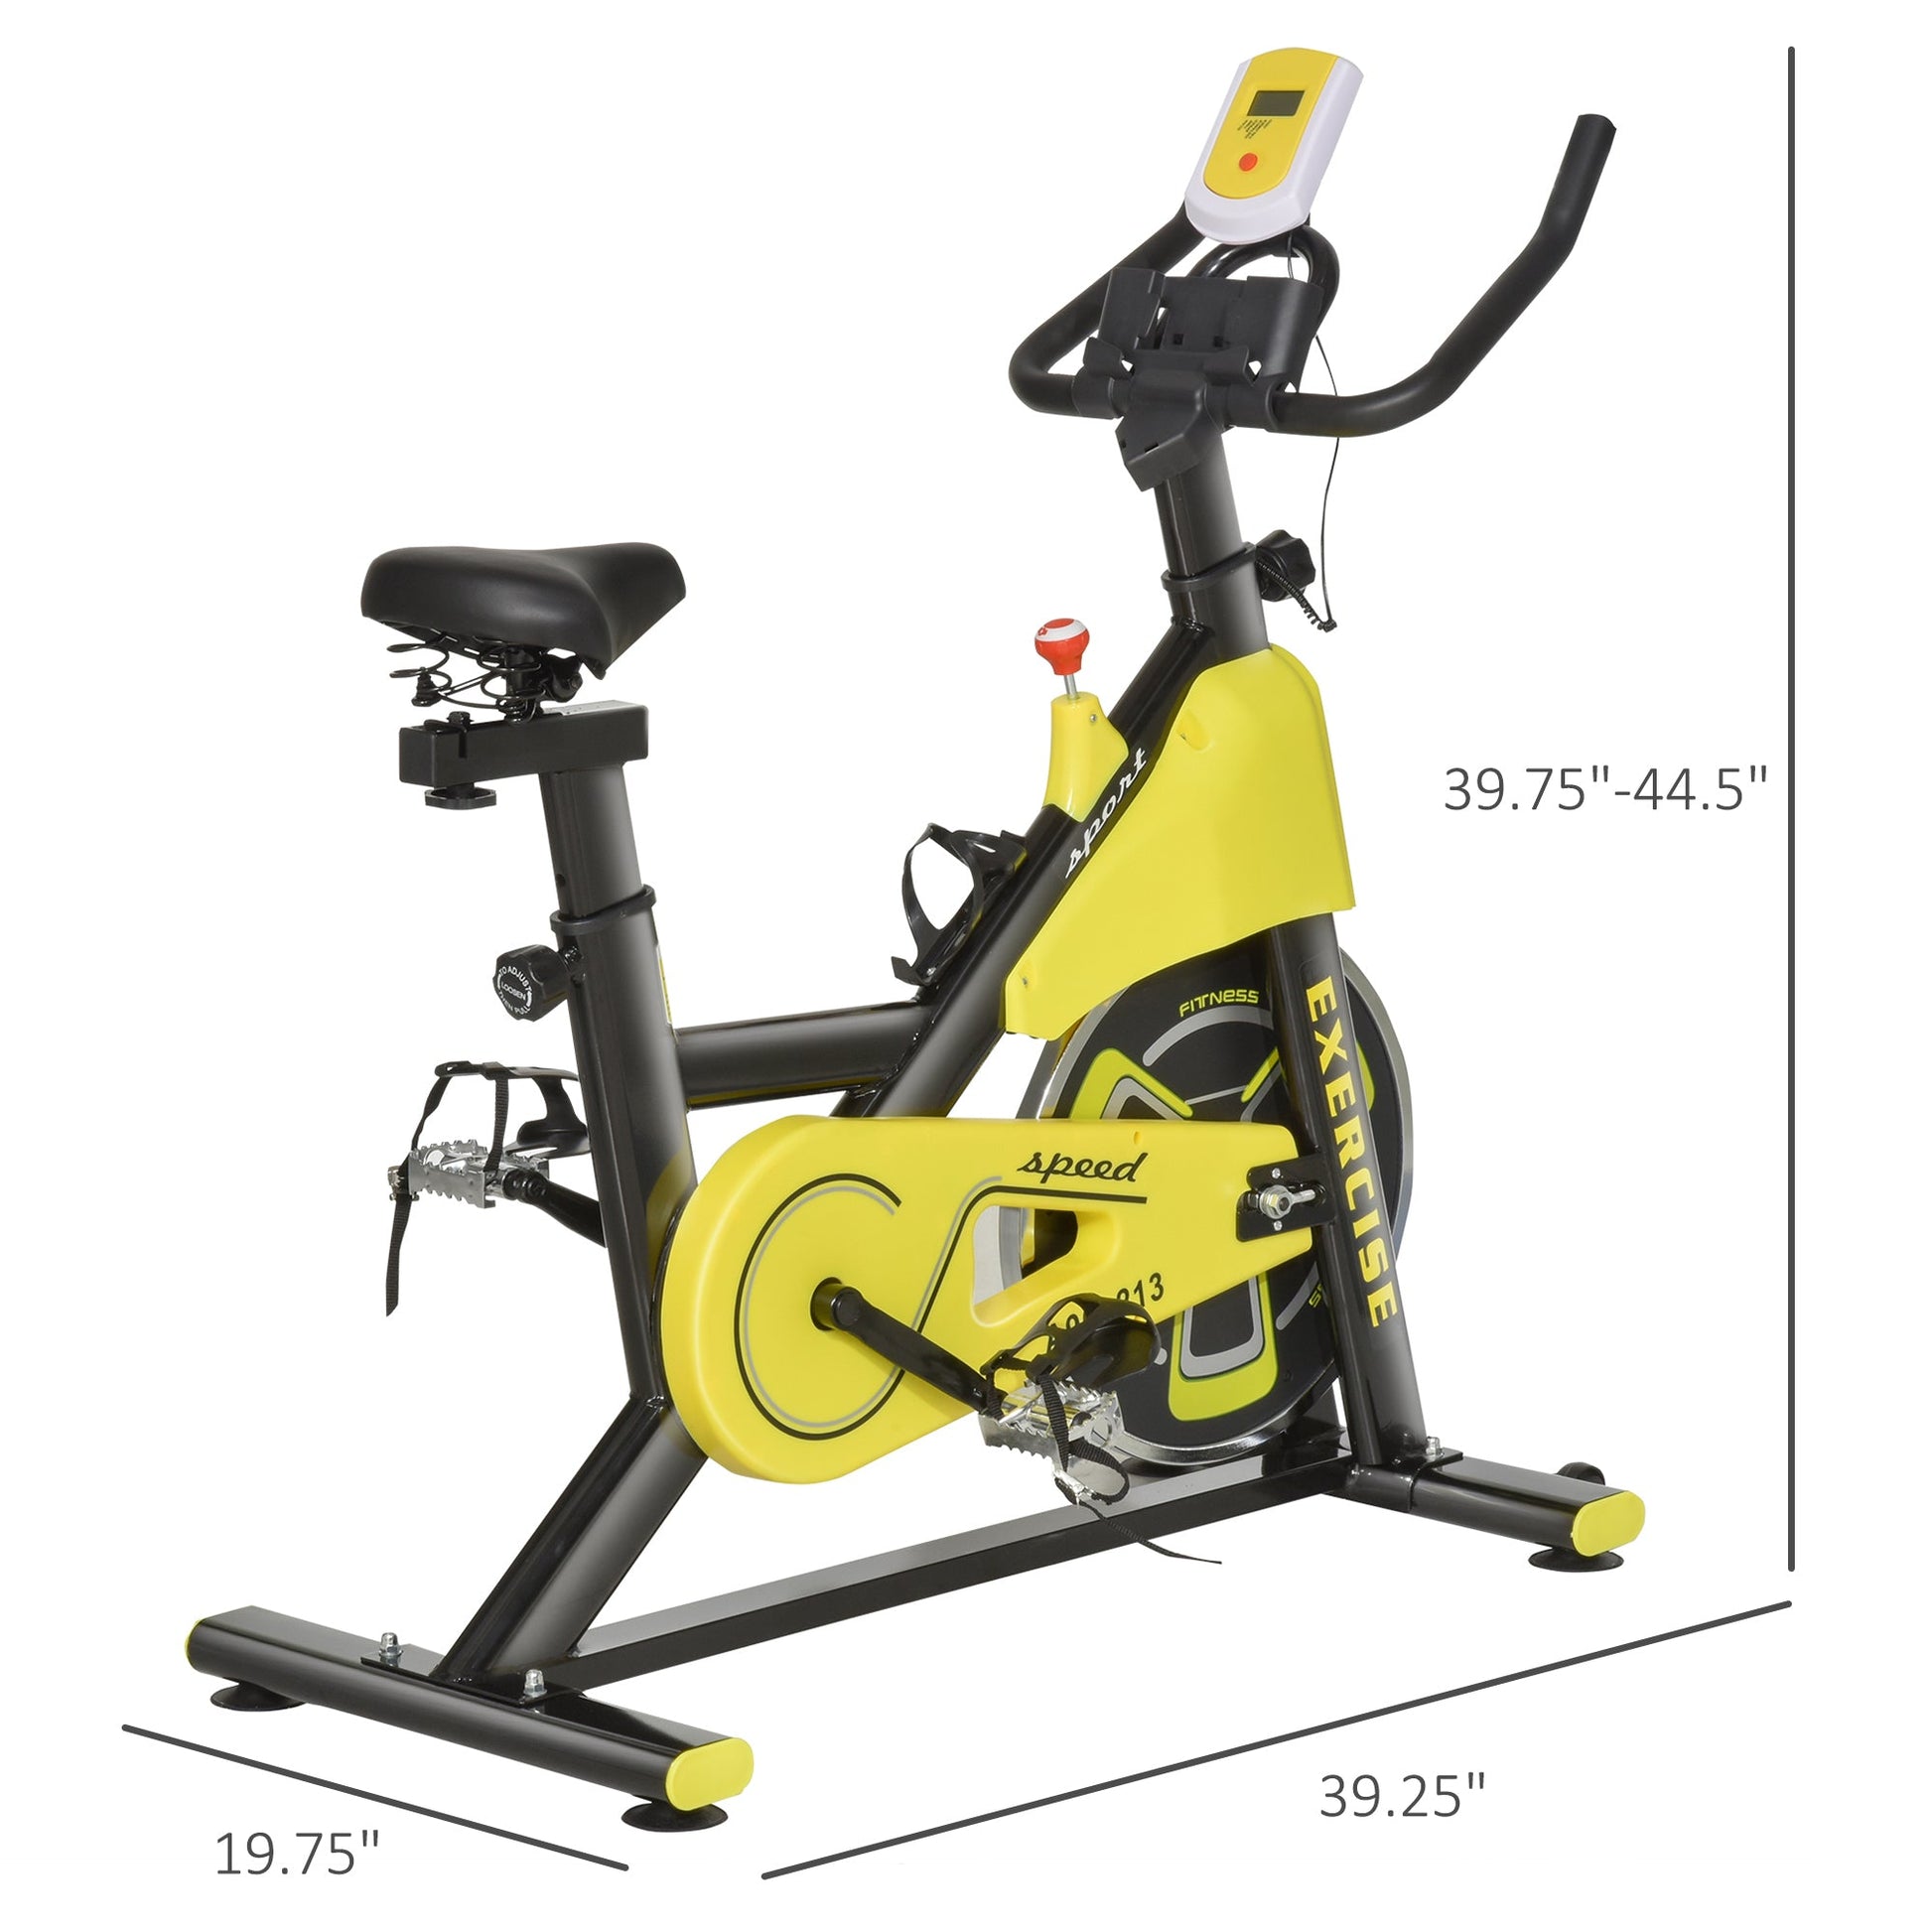 Stationary Exercise Bike, Indoor Cardio Workout Cycling Bike with with Belt Drive Adjustable Resistance, Seat, Handlebar w/ LCD Display for Home Gym at Gallery Canada